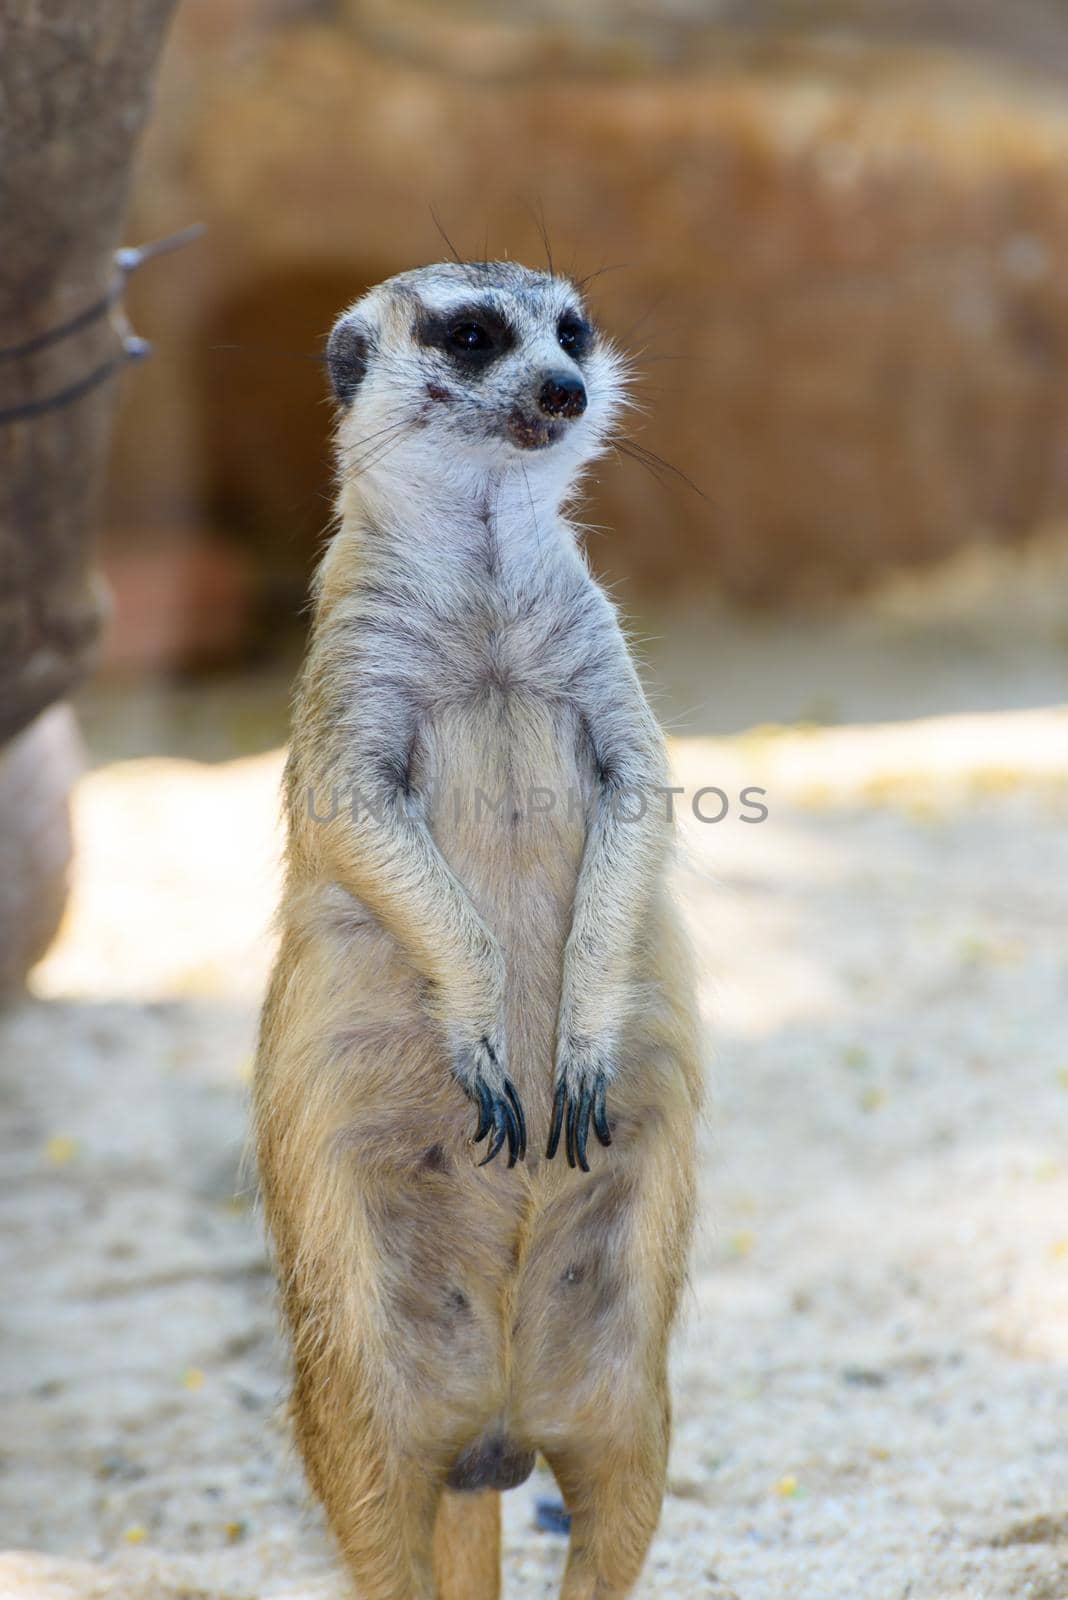 Meerkat mongoose or Suricata suricatta standing on the sand watchful eye with funny and cute in the zoo or safari it is an animal that lives in the Kalahari Desert of southern Africa